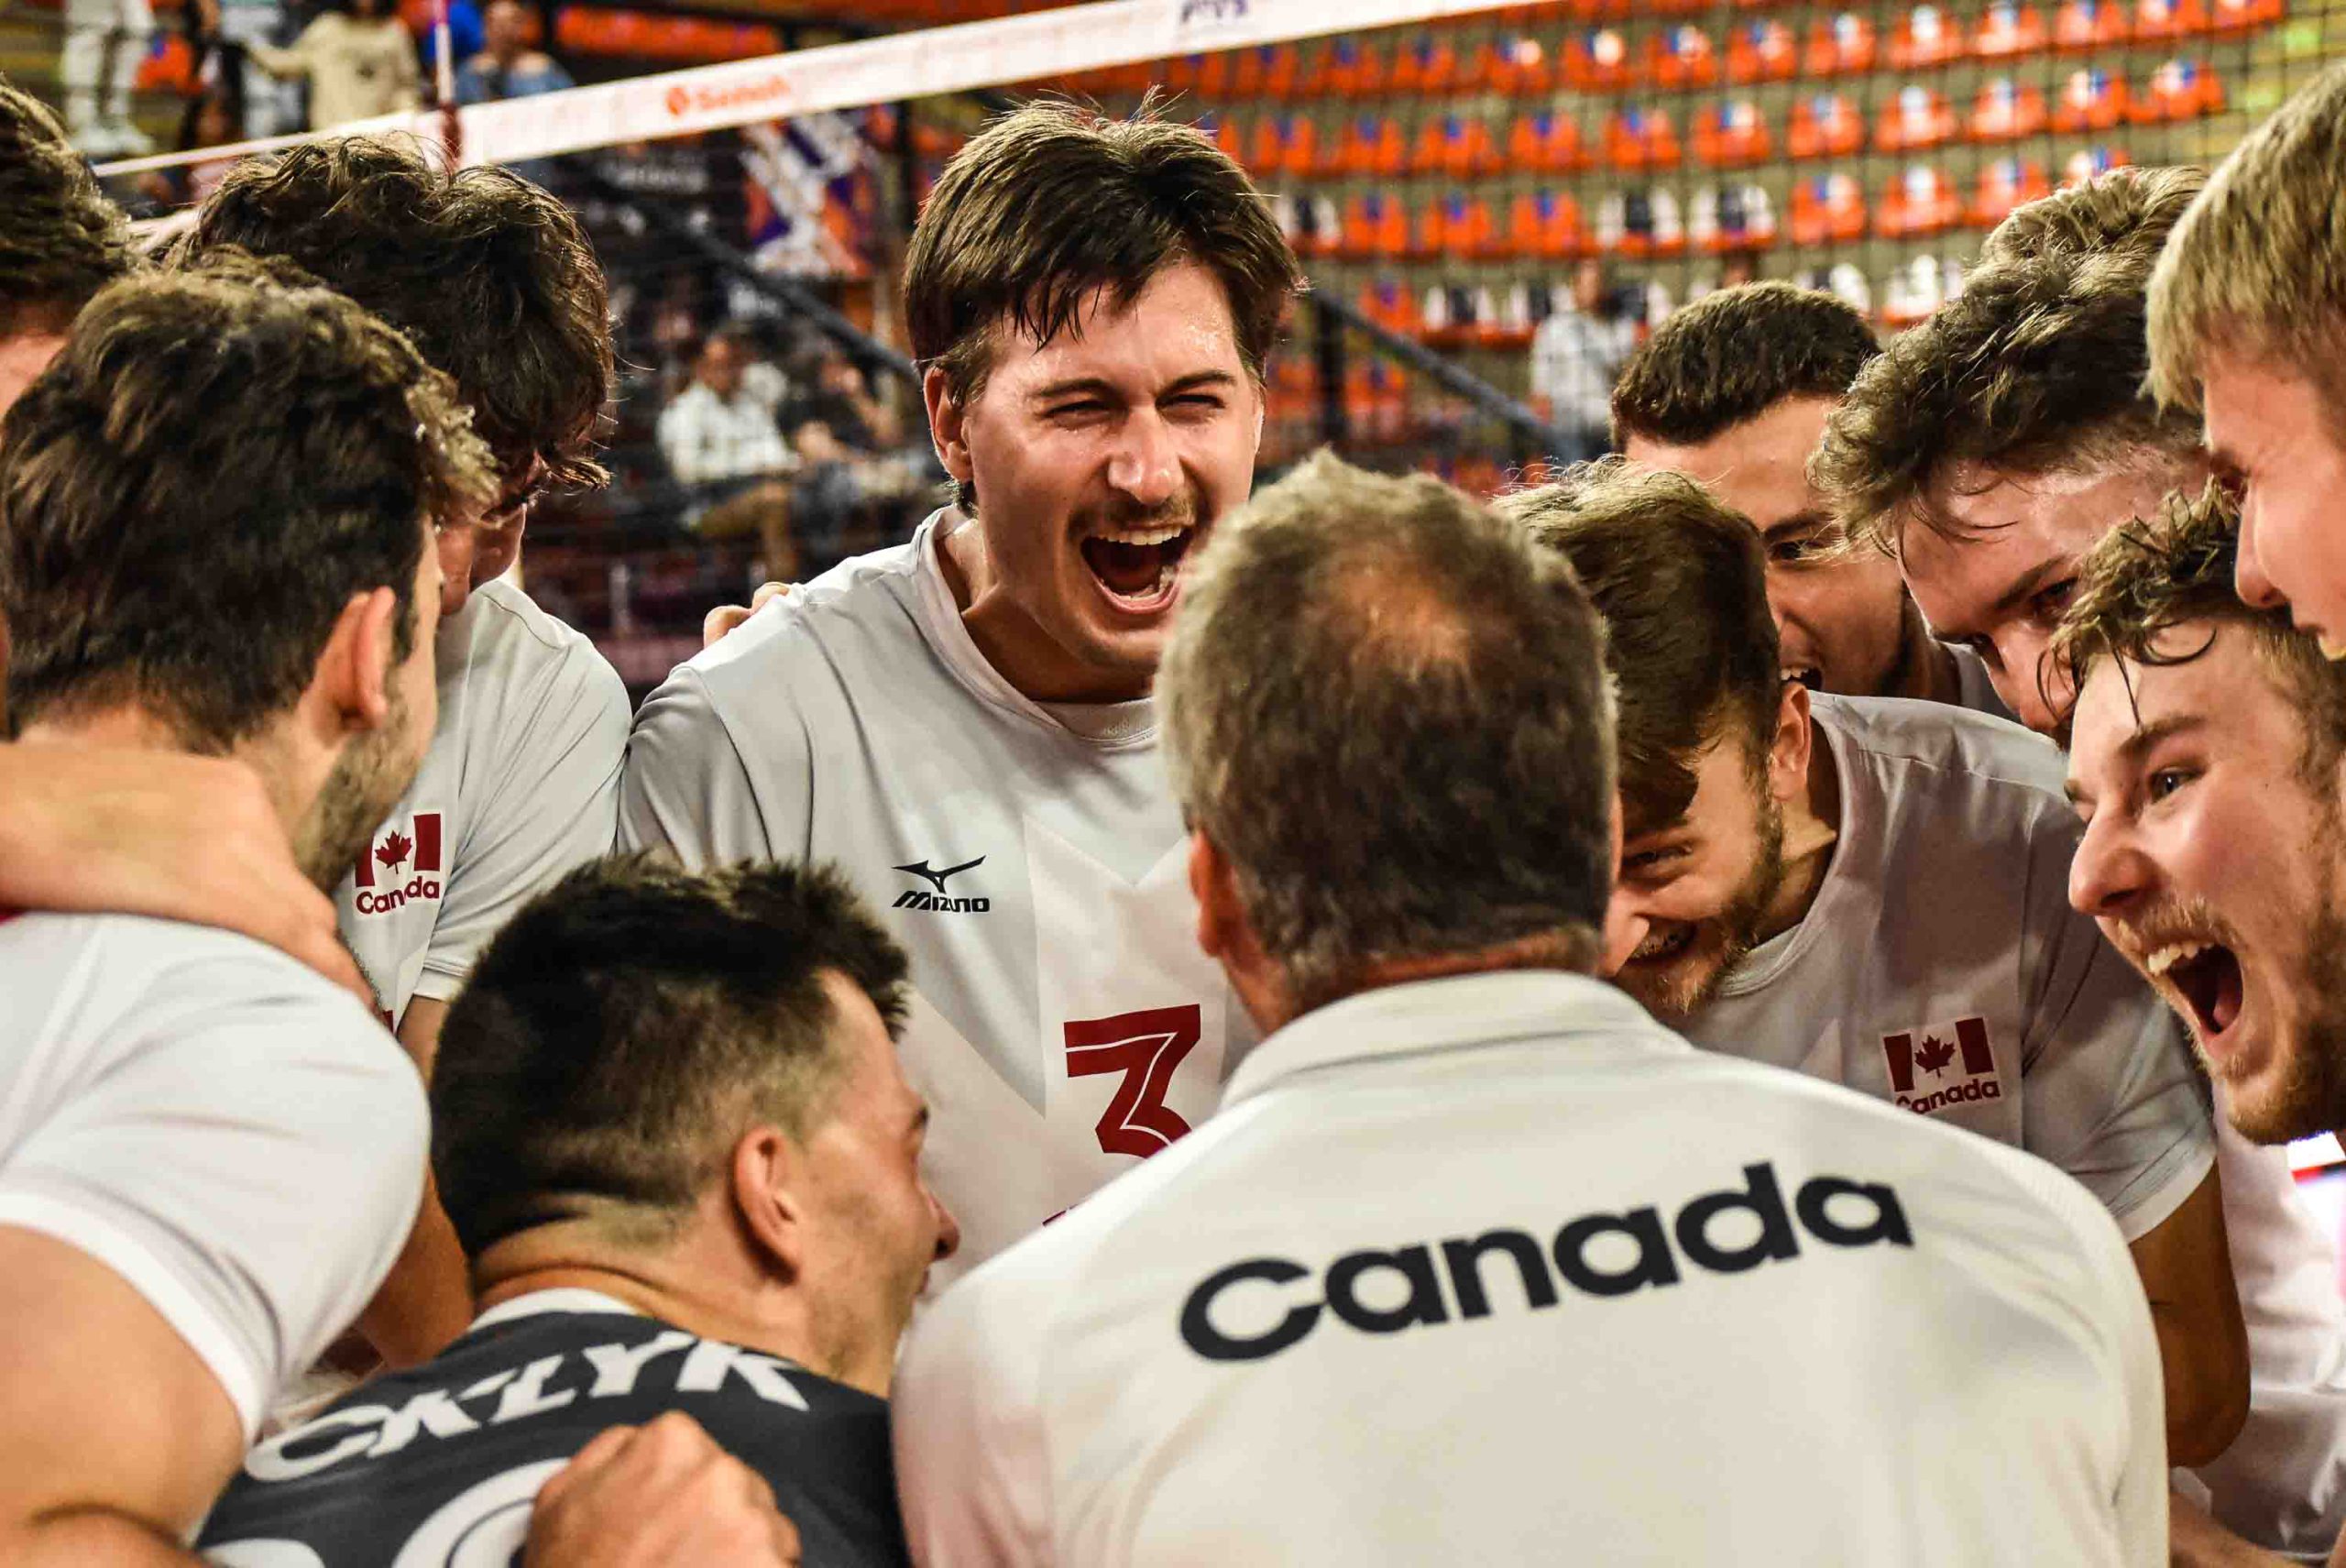 Canada advances to semifinals defeating United States 3-0